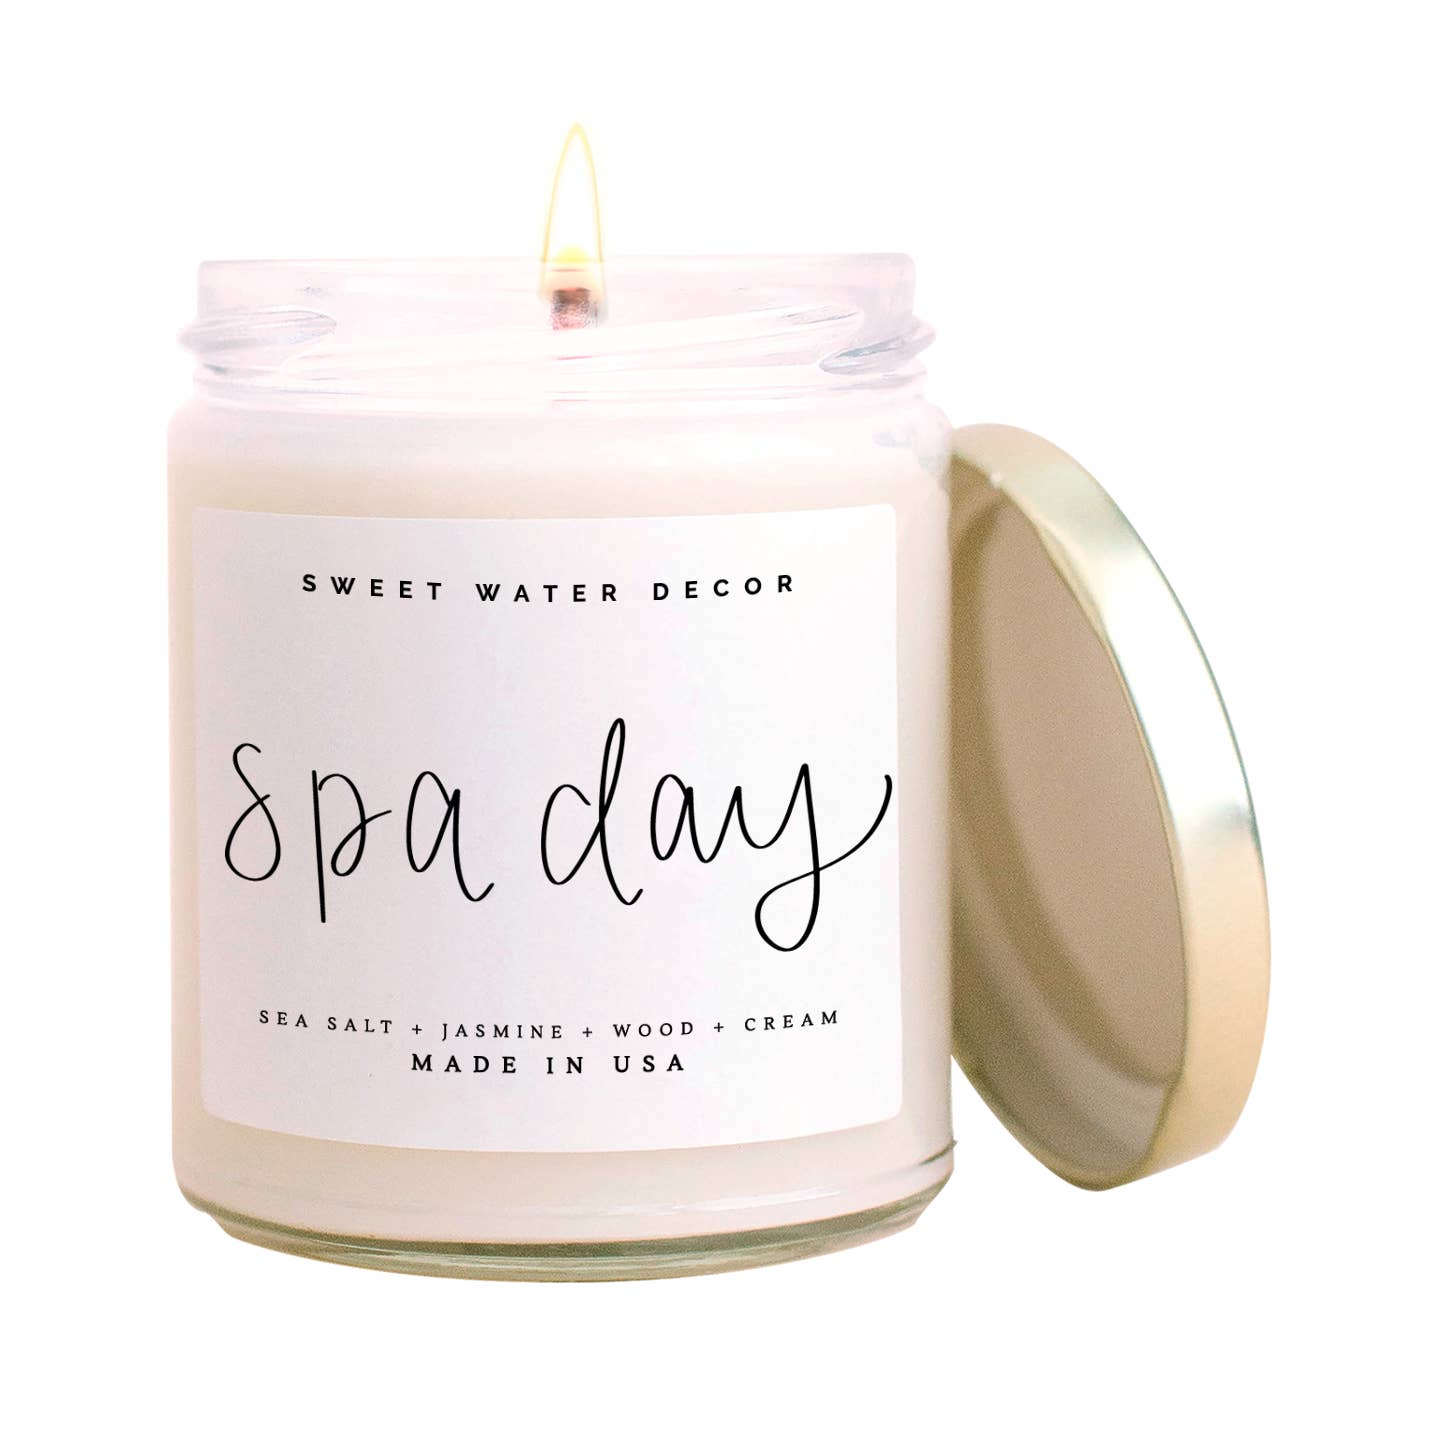 Sweet Water Decor Home Decor default Spa Day Soy Candle - Clear Jar - 9 oz